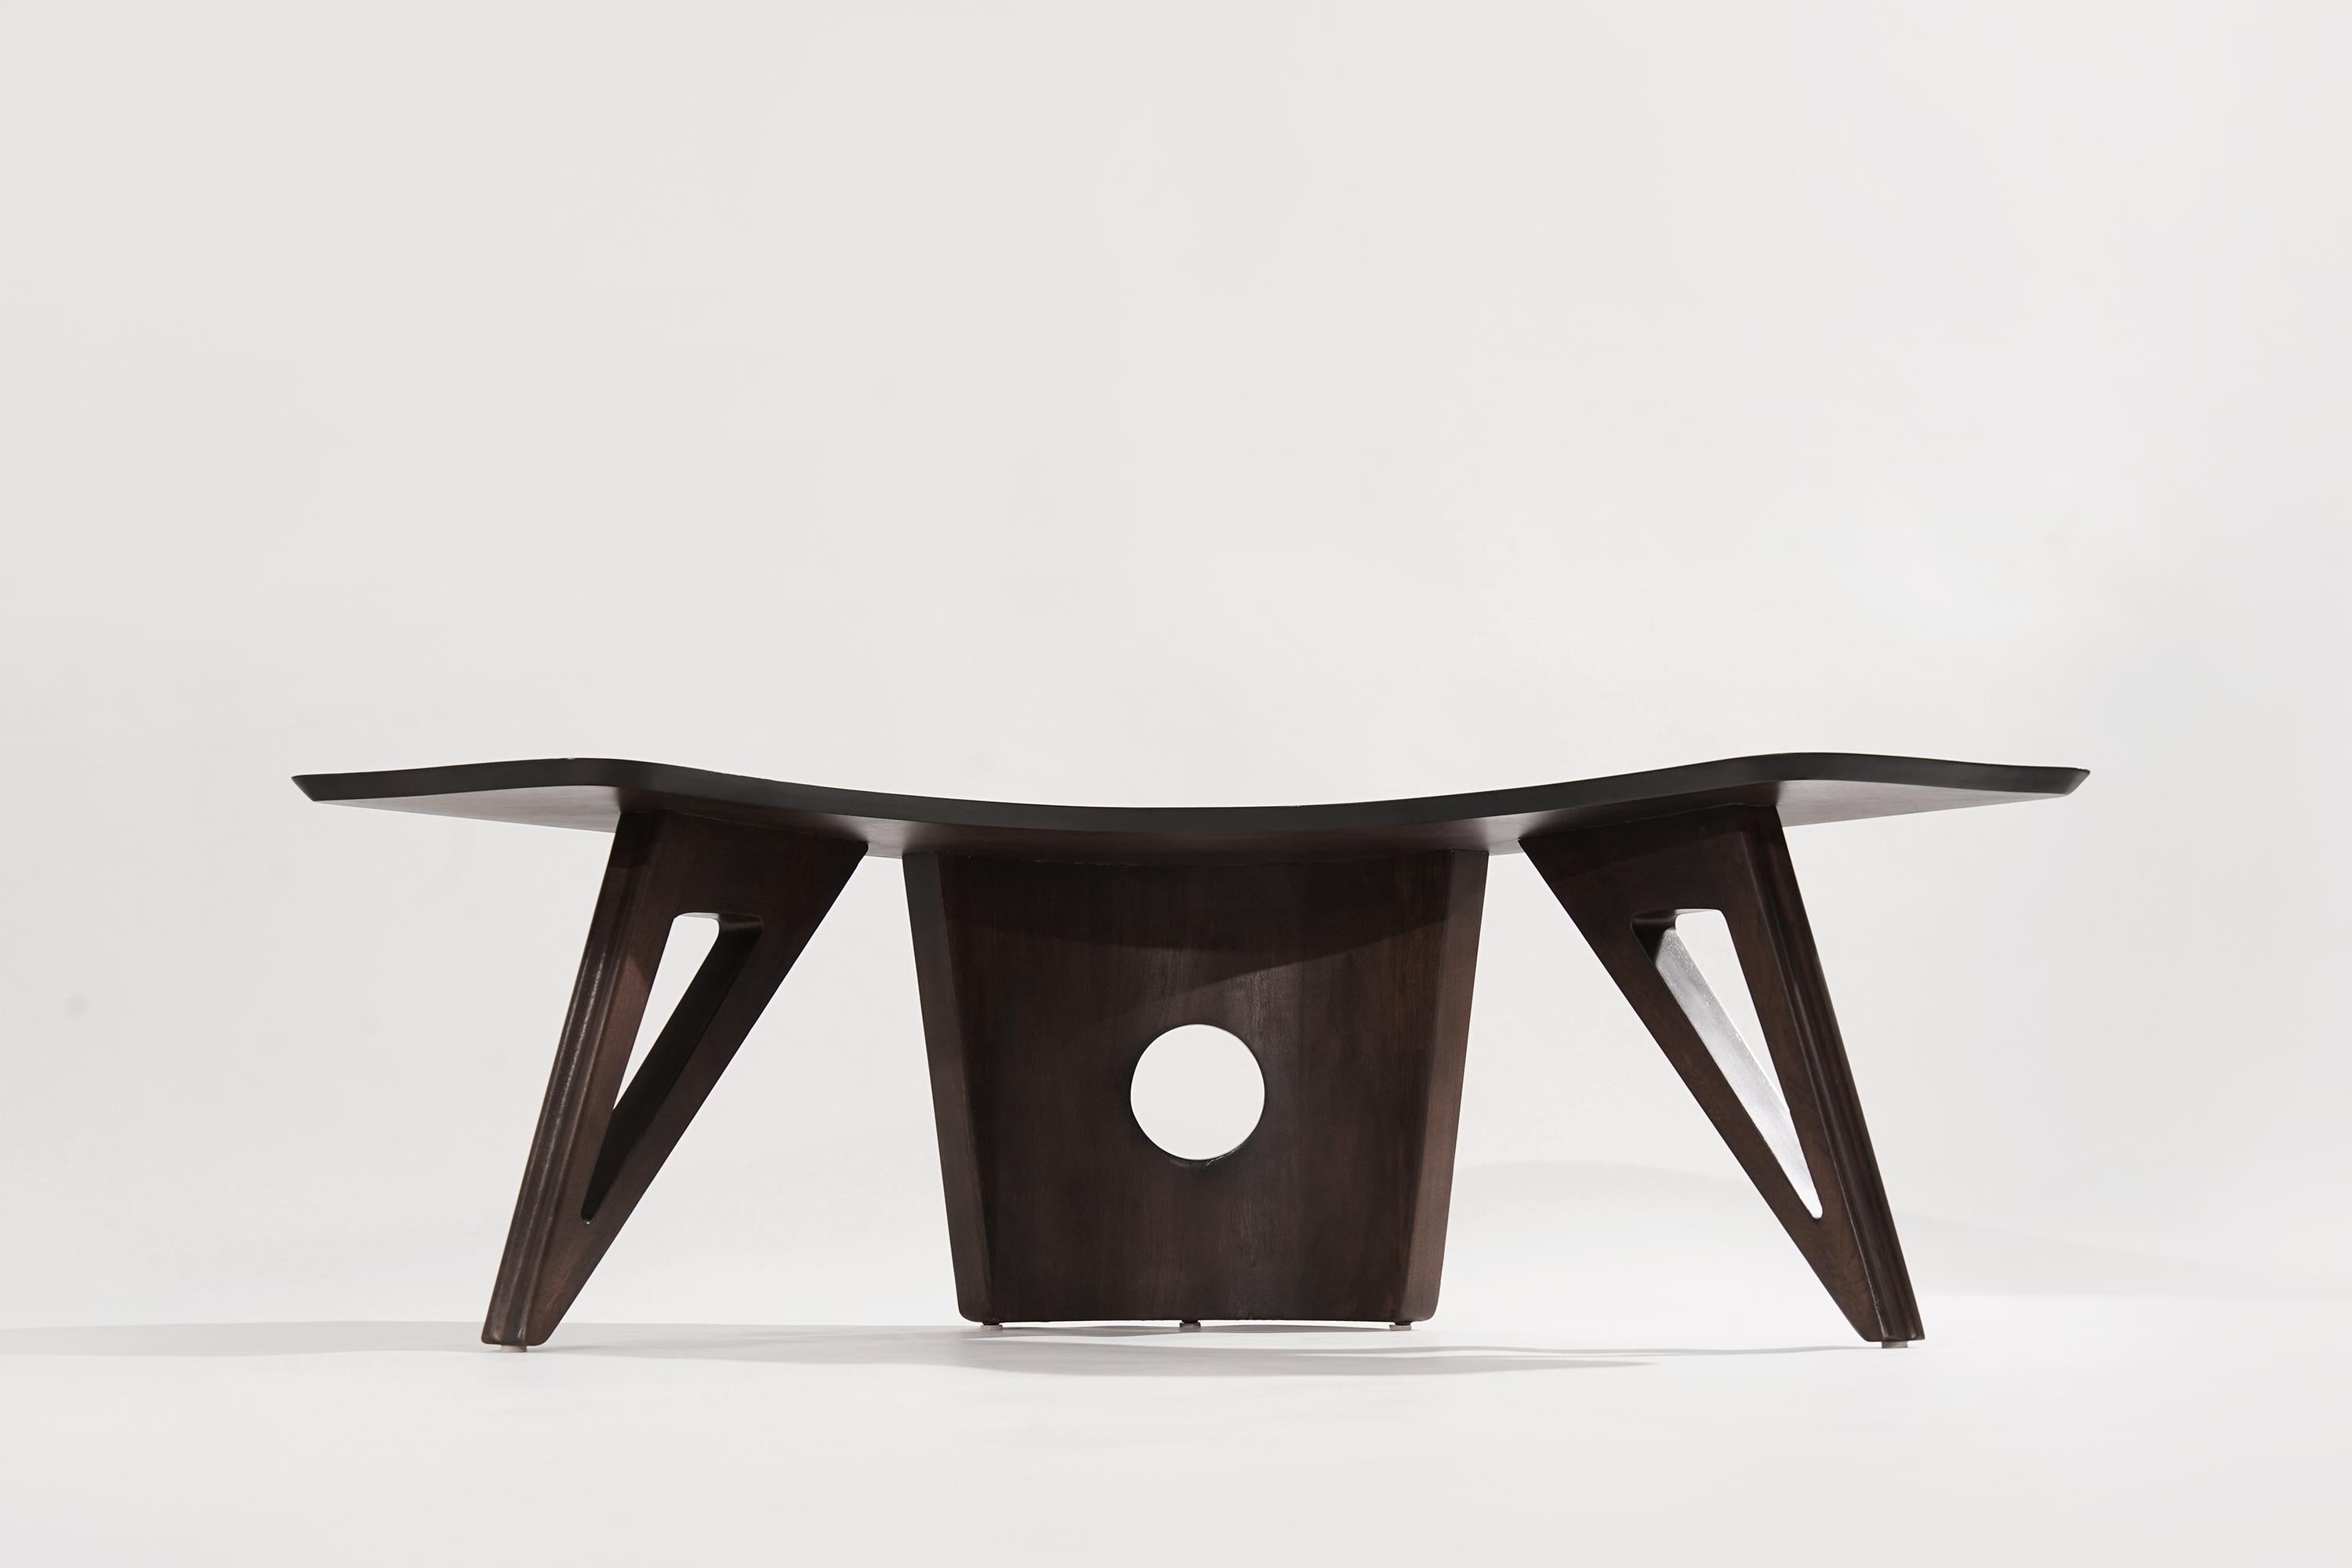 Sculptural Walnut Boomerang Coffee Table, 1950s For Sale 1